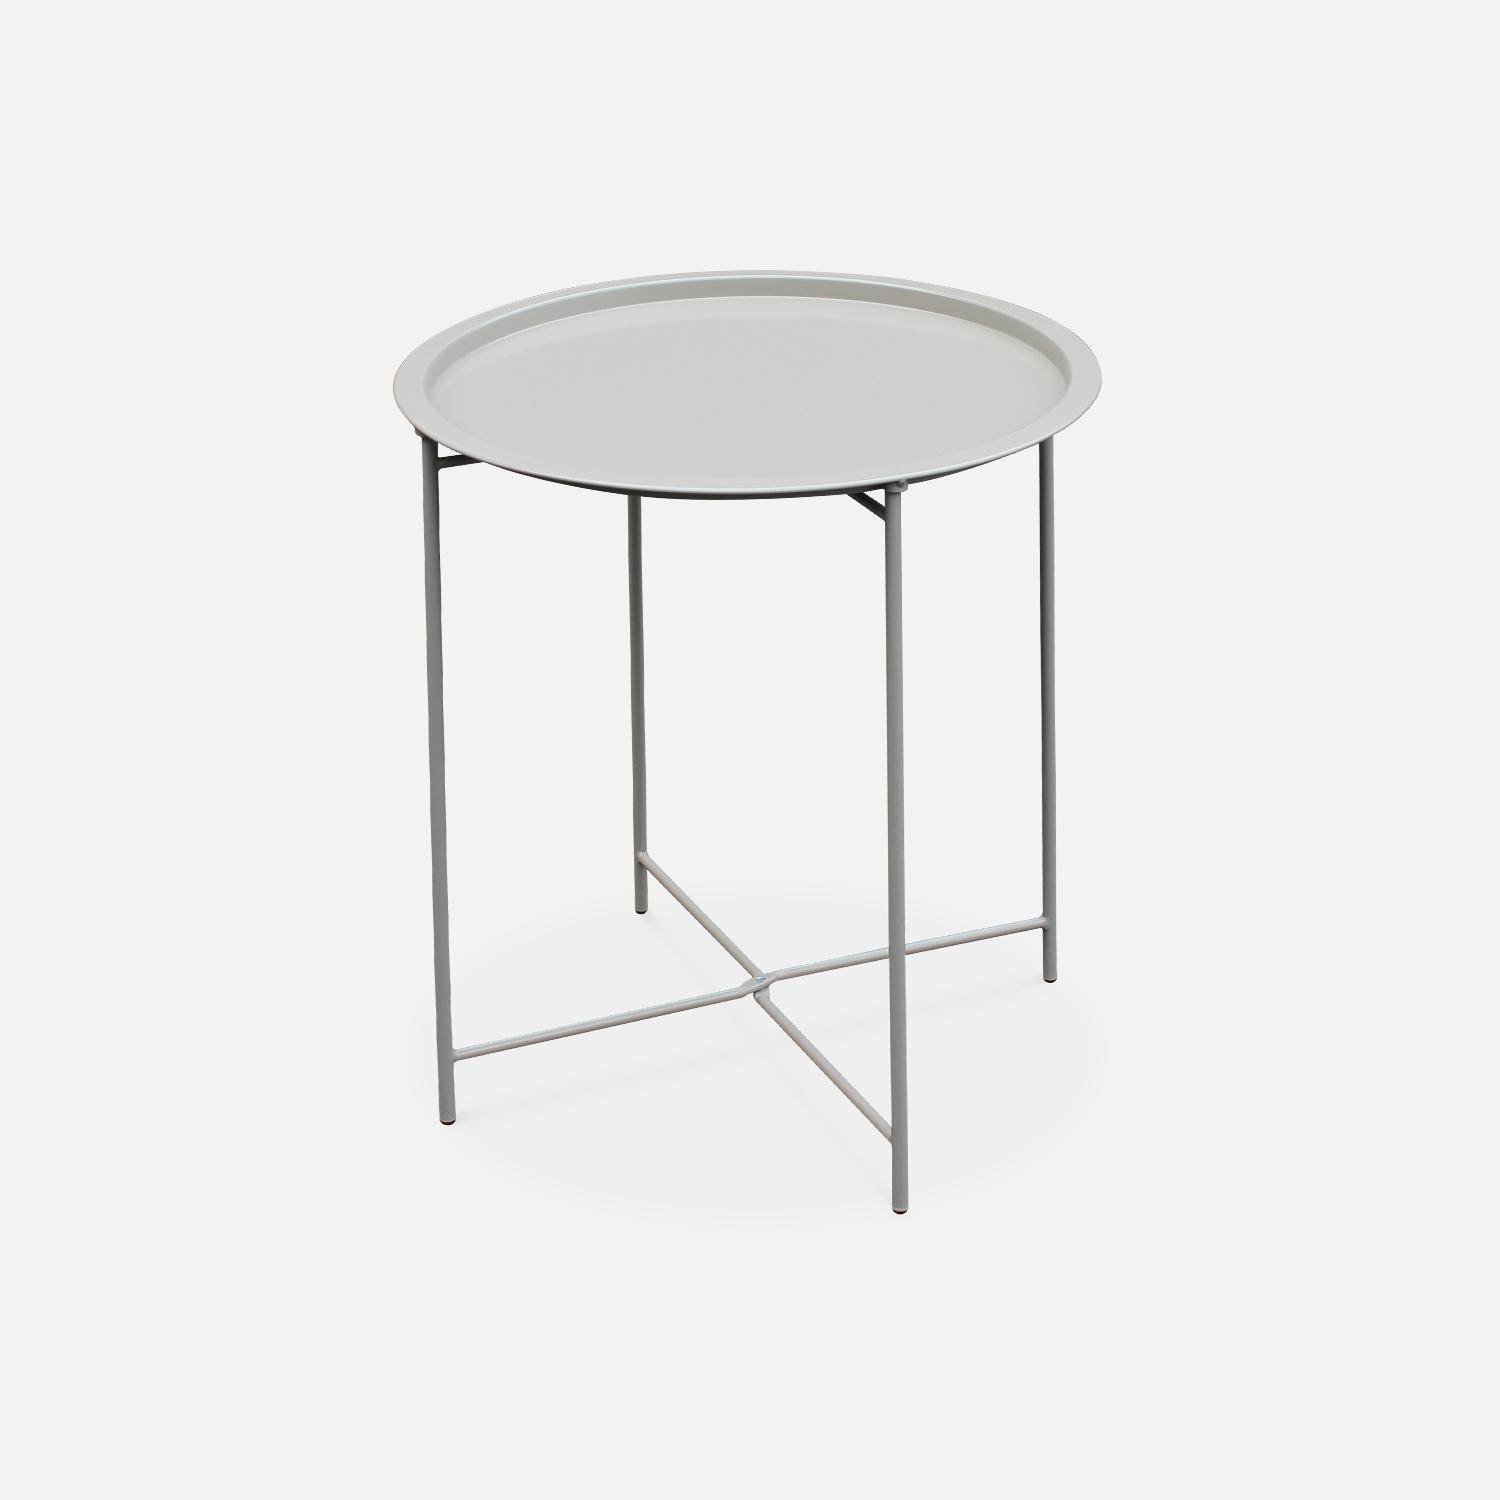 Round coffee table - Alexia Taupe Grey - Round side table Ø46cm, powder-coated steel Photo2